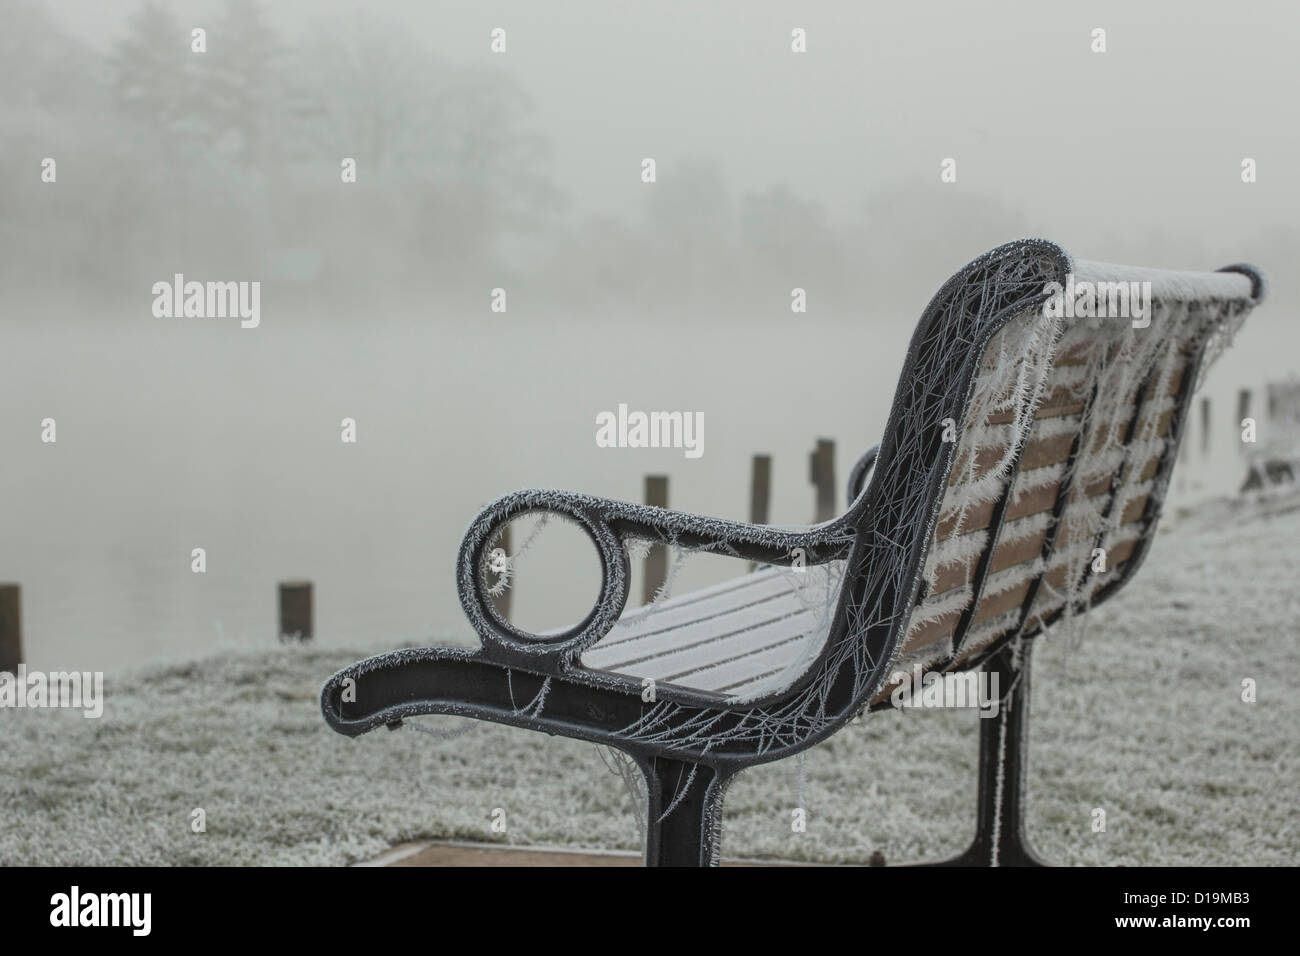 Henley-on-Thames, UK. 12th December 2012. Many people in the south of England woke to a severe frost, fog and temperatures well below freezing this morning.  Stock Photo